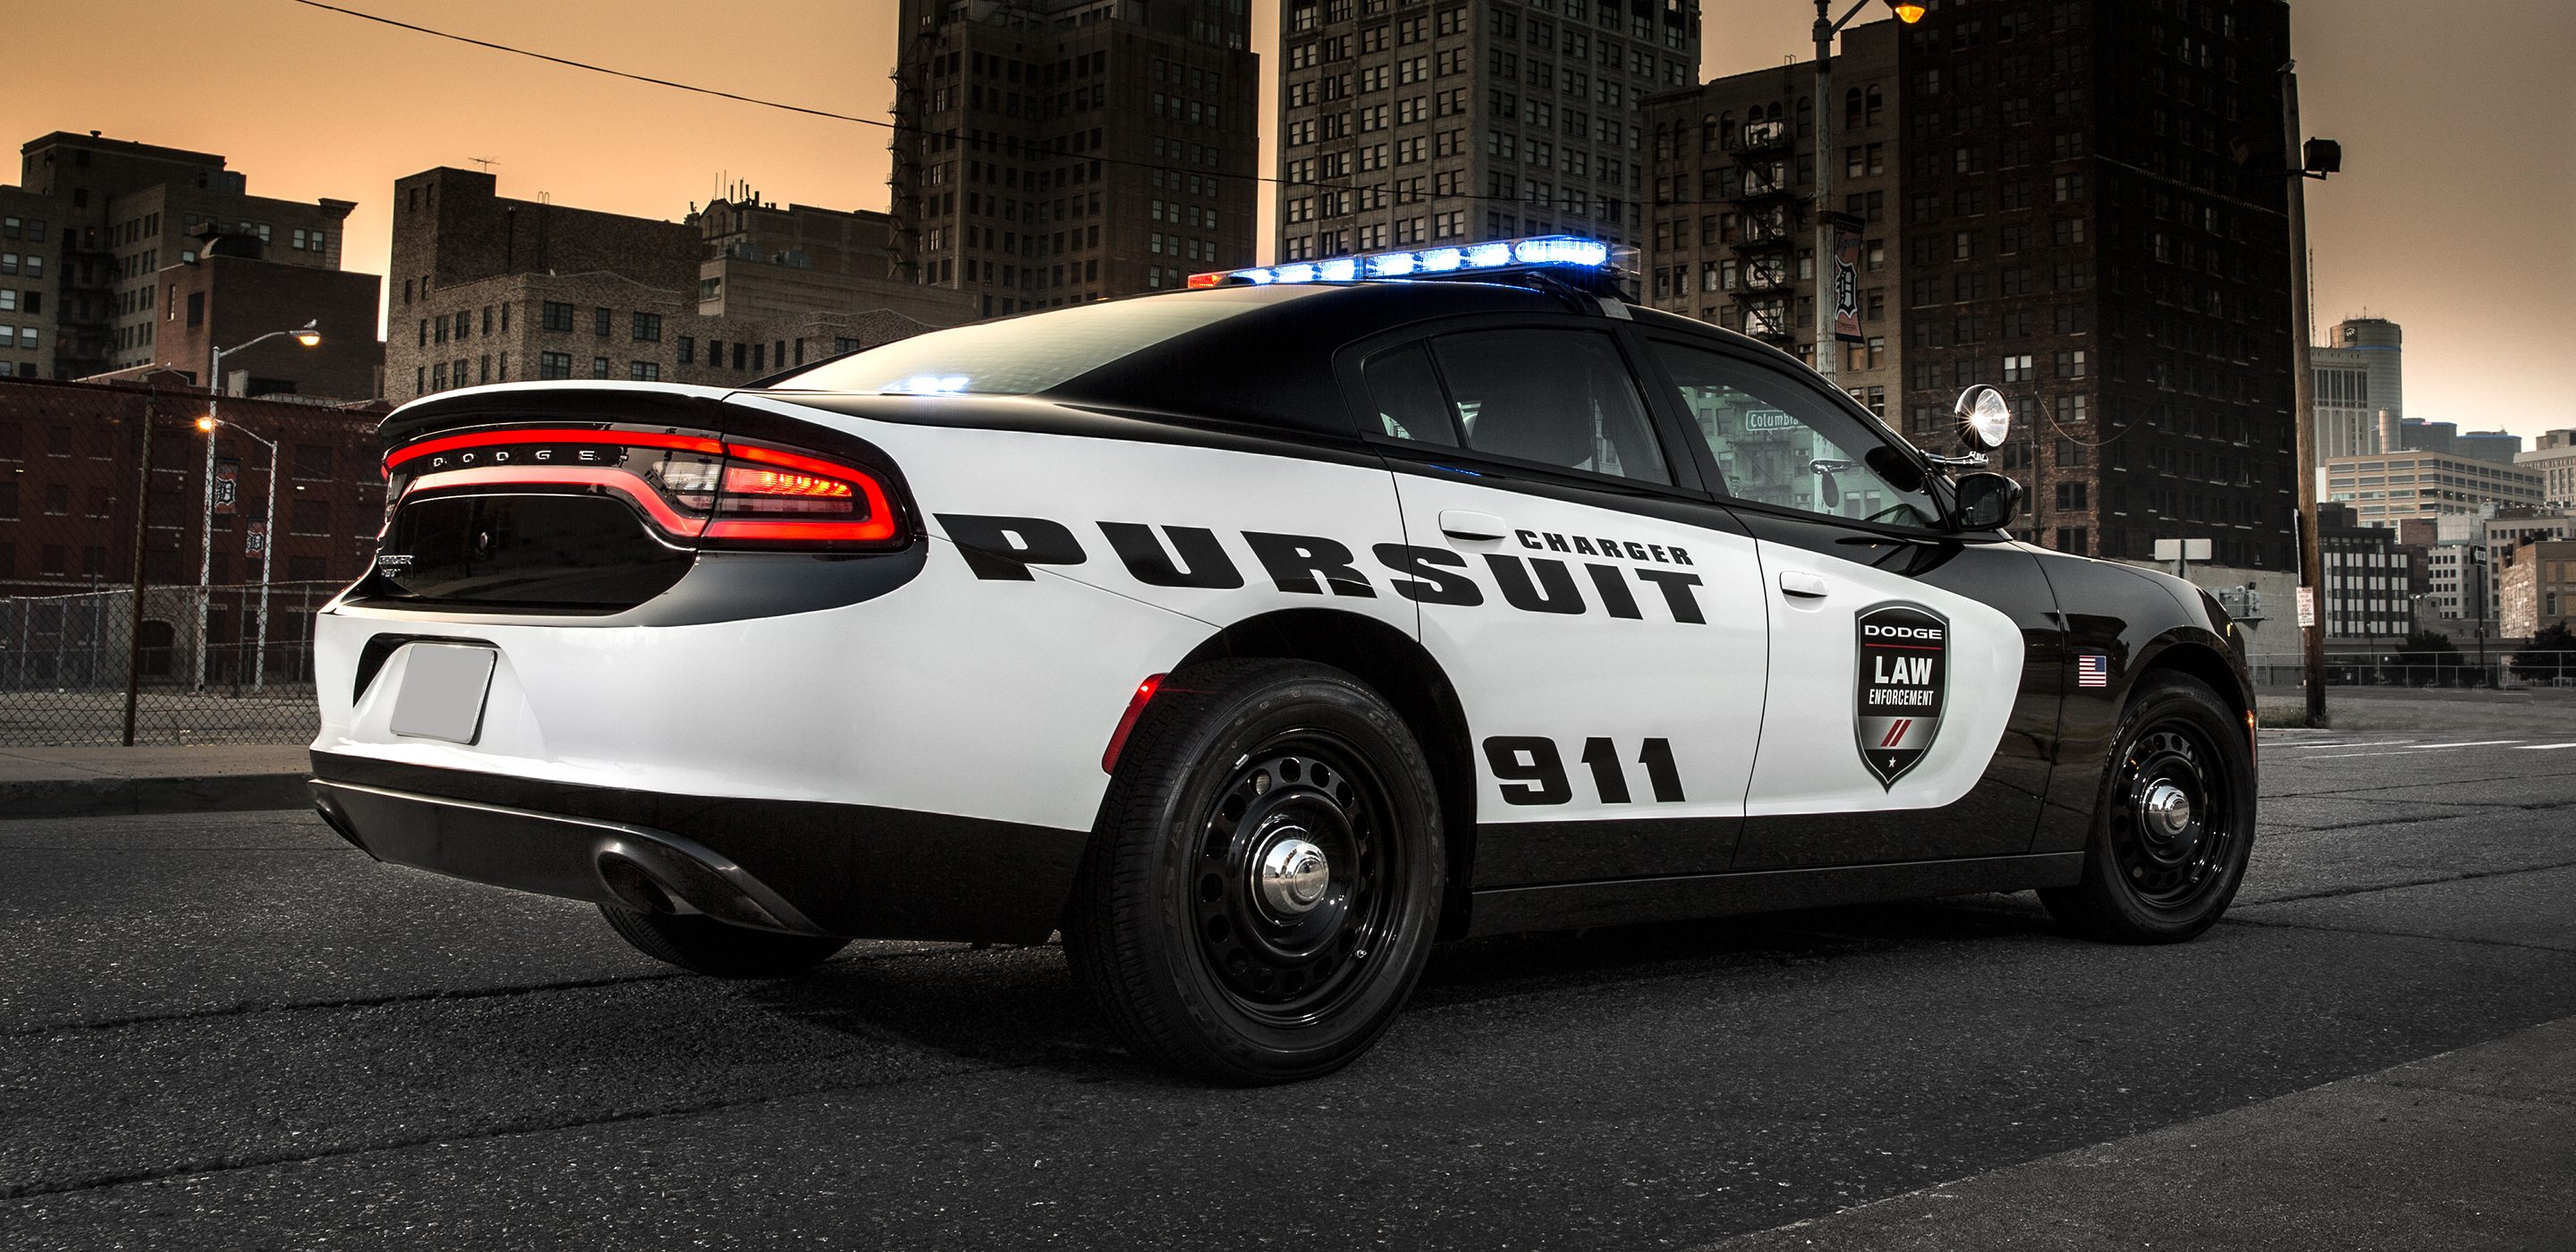 2012 dodge charger police manual